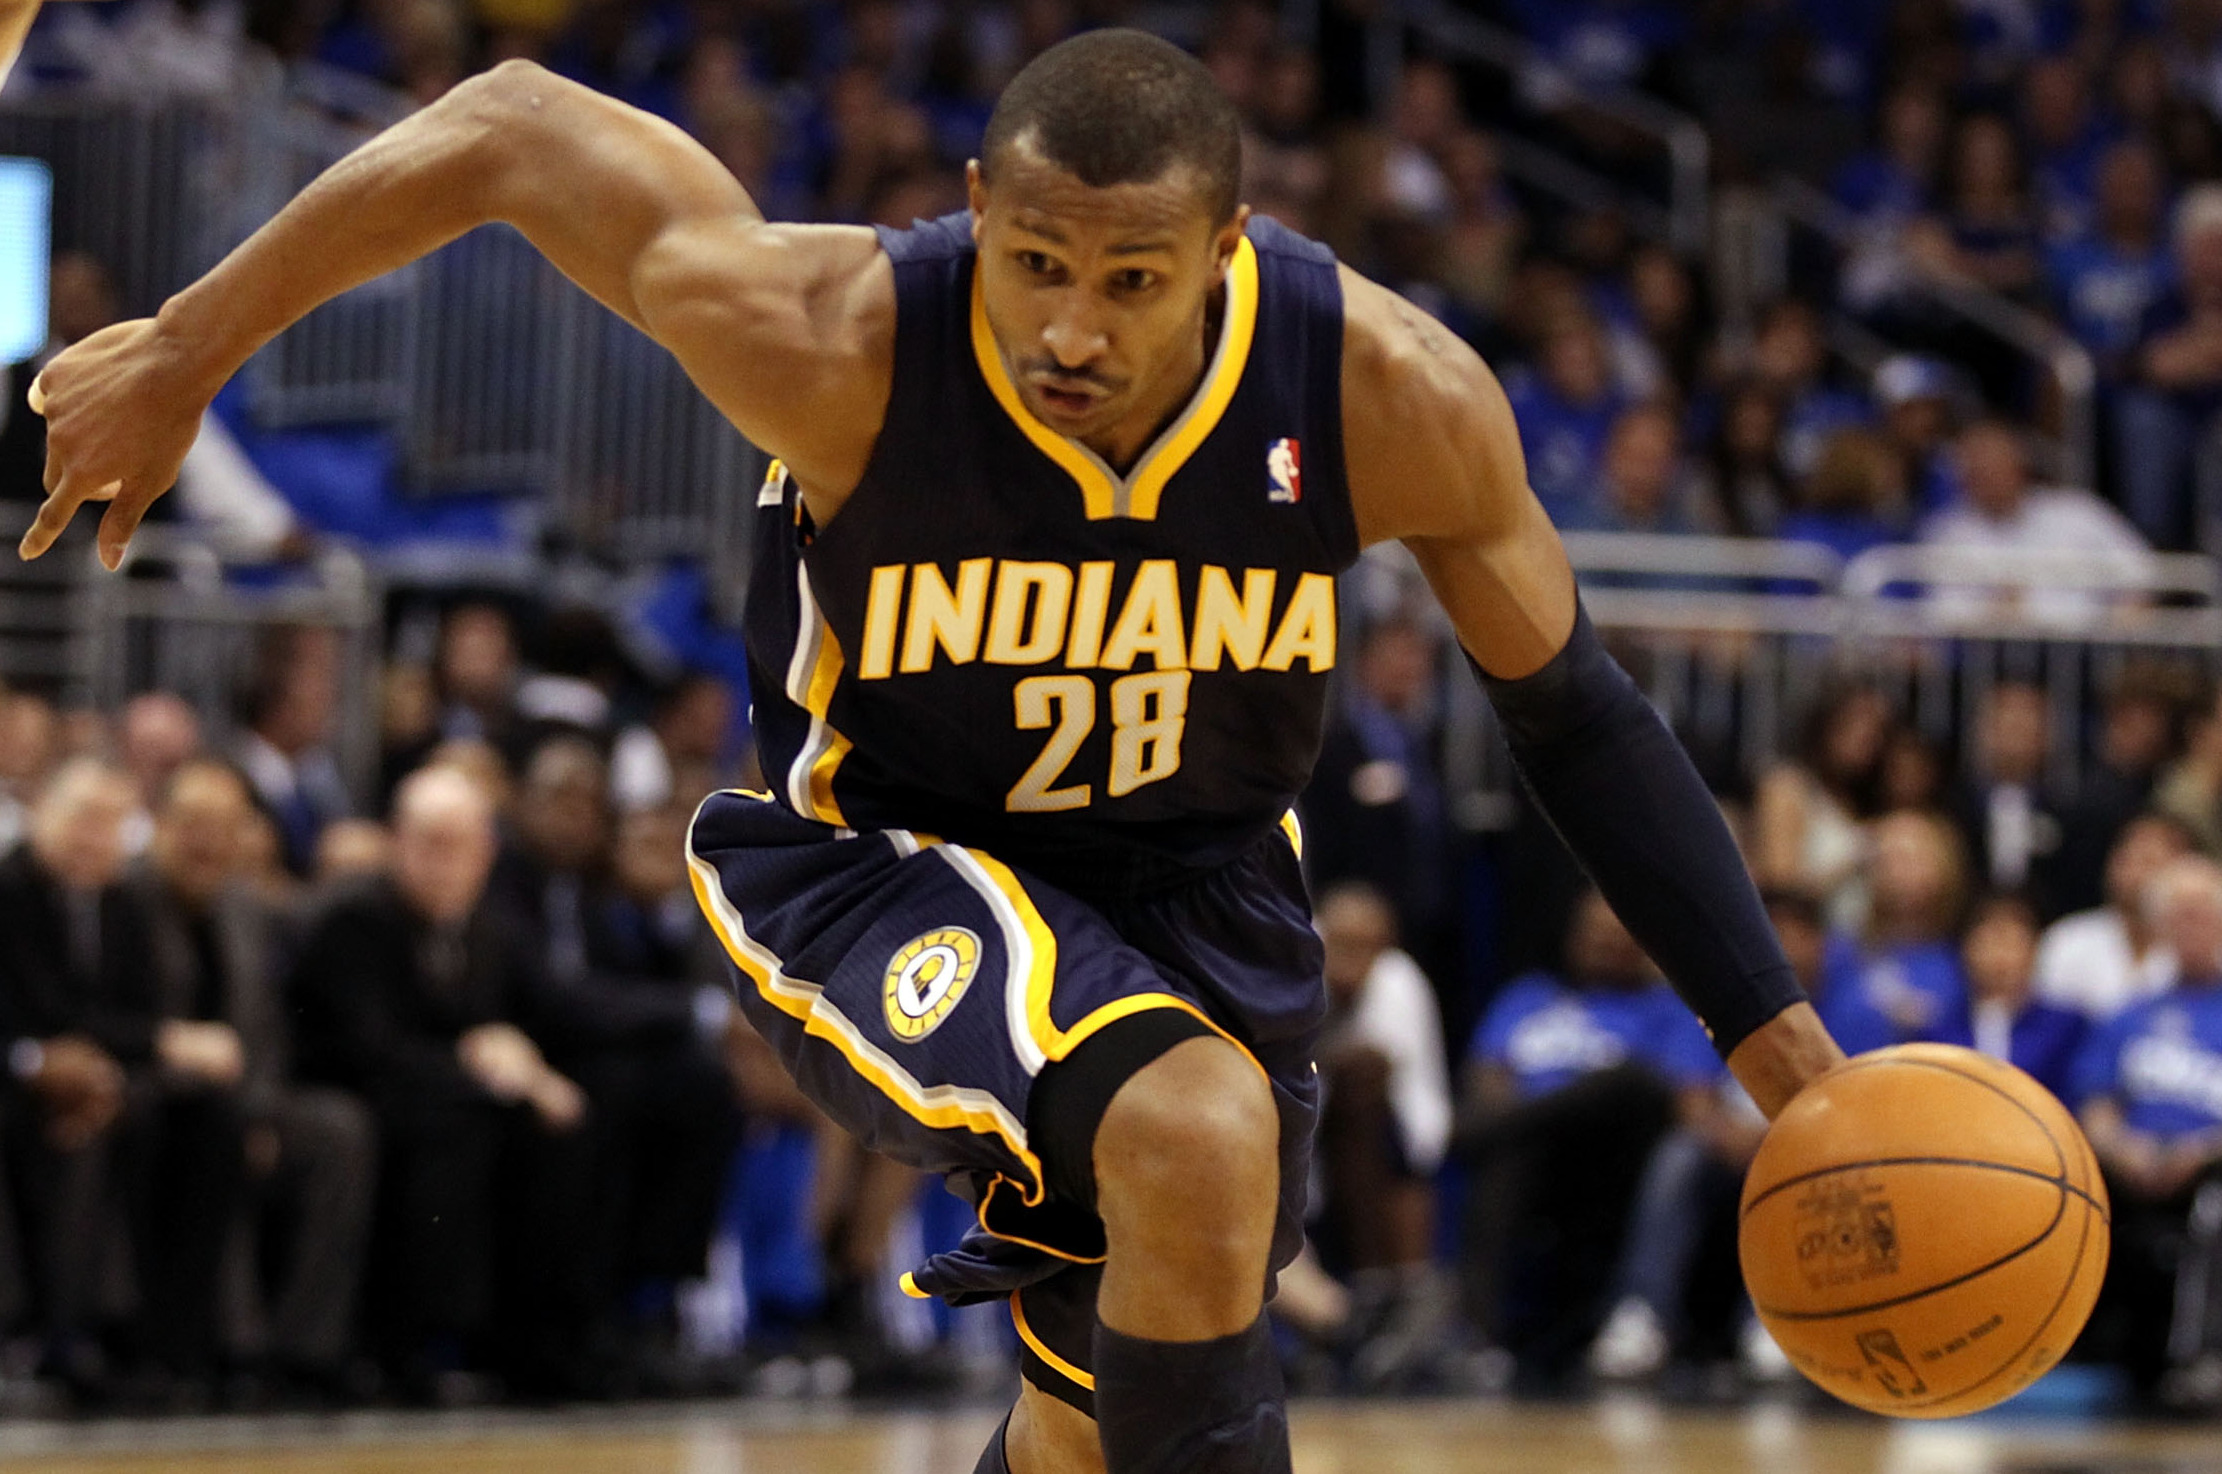 Boston Celtics agree to deal with Leandro Barbosa, according to